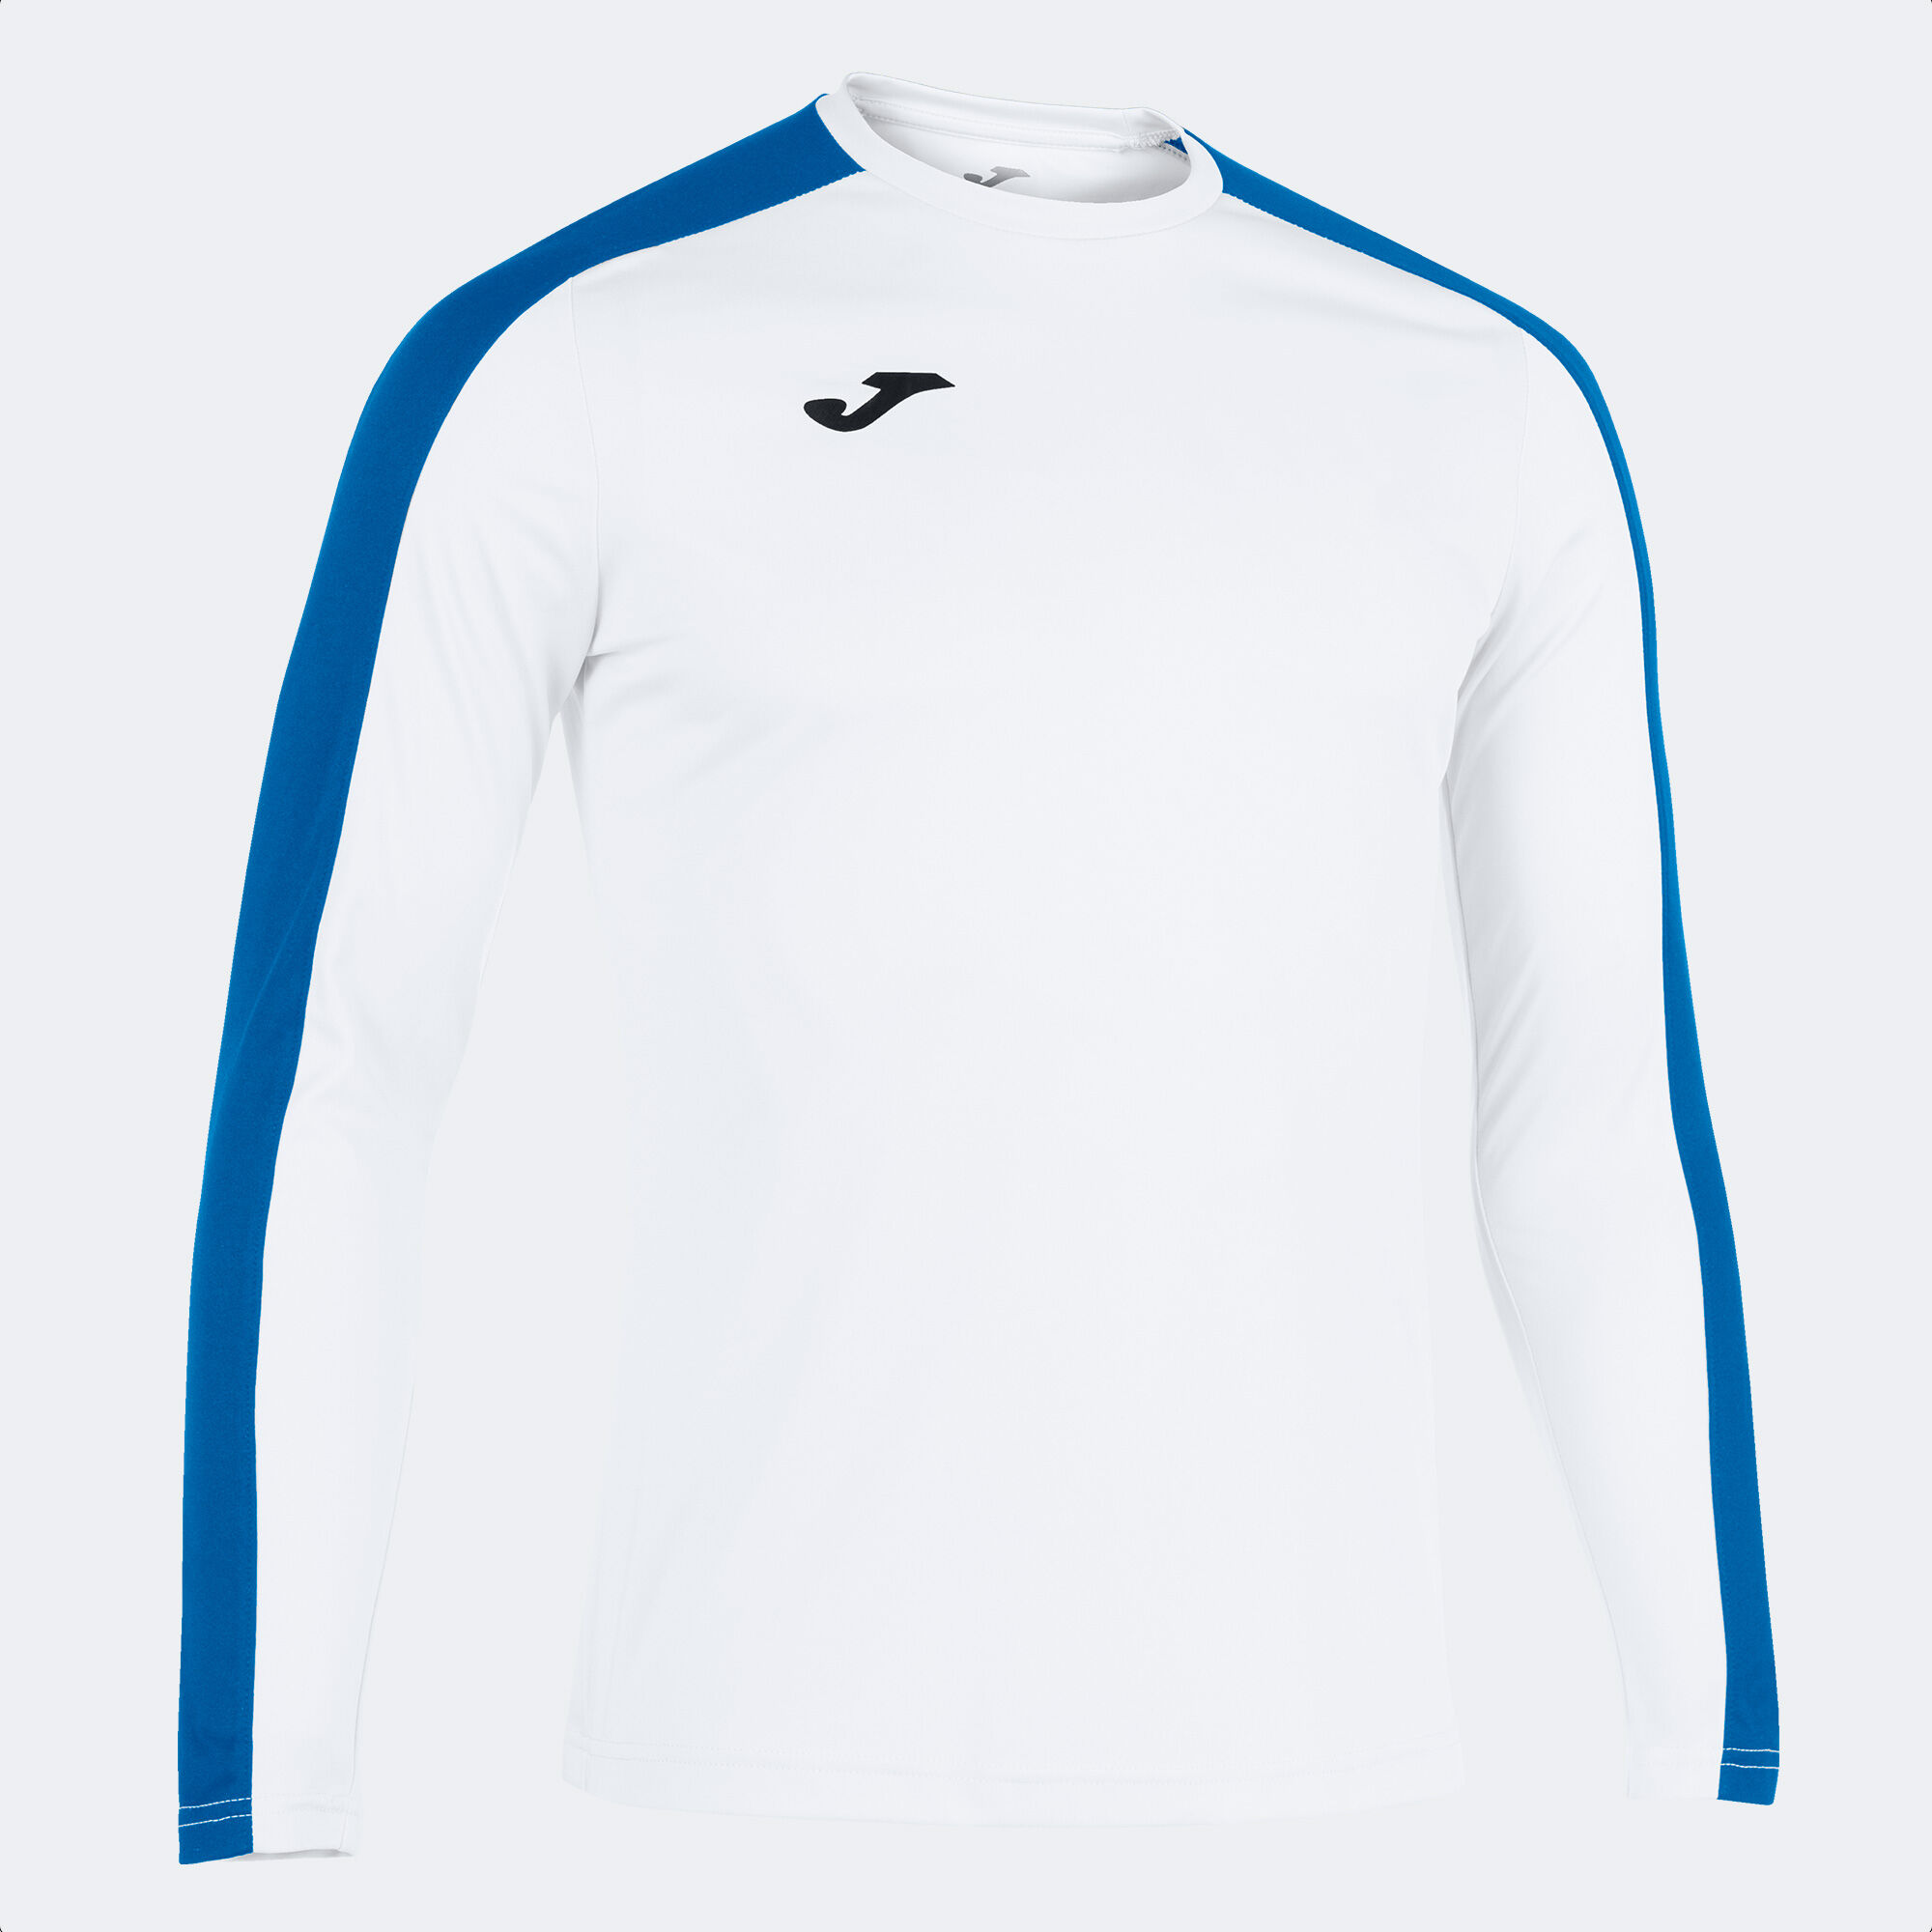 MAILLOT MANCHES LONGUES HOMME ACADEMY III BLANC BLEU ROI